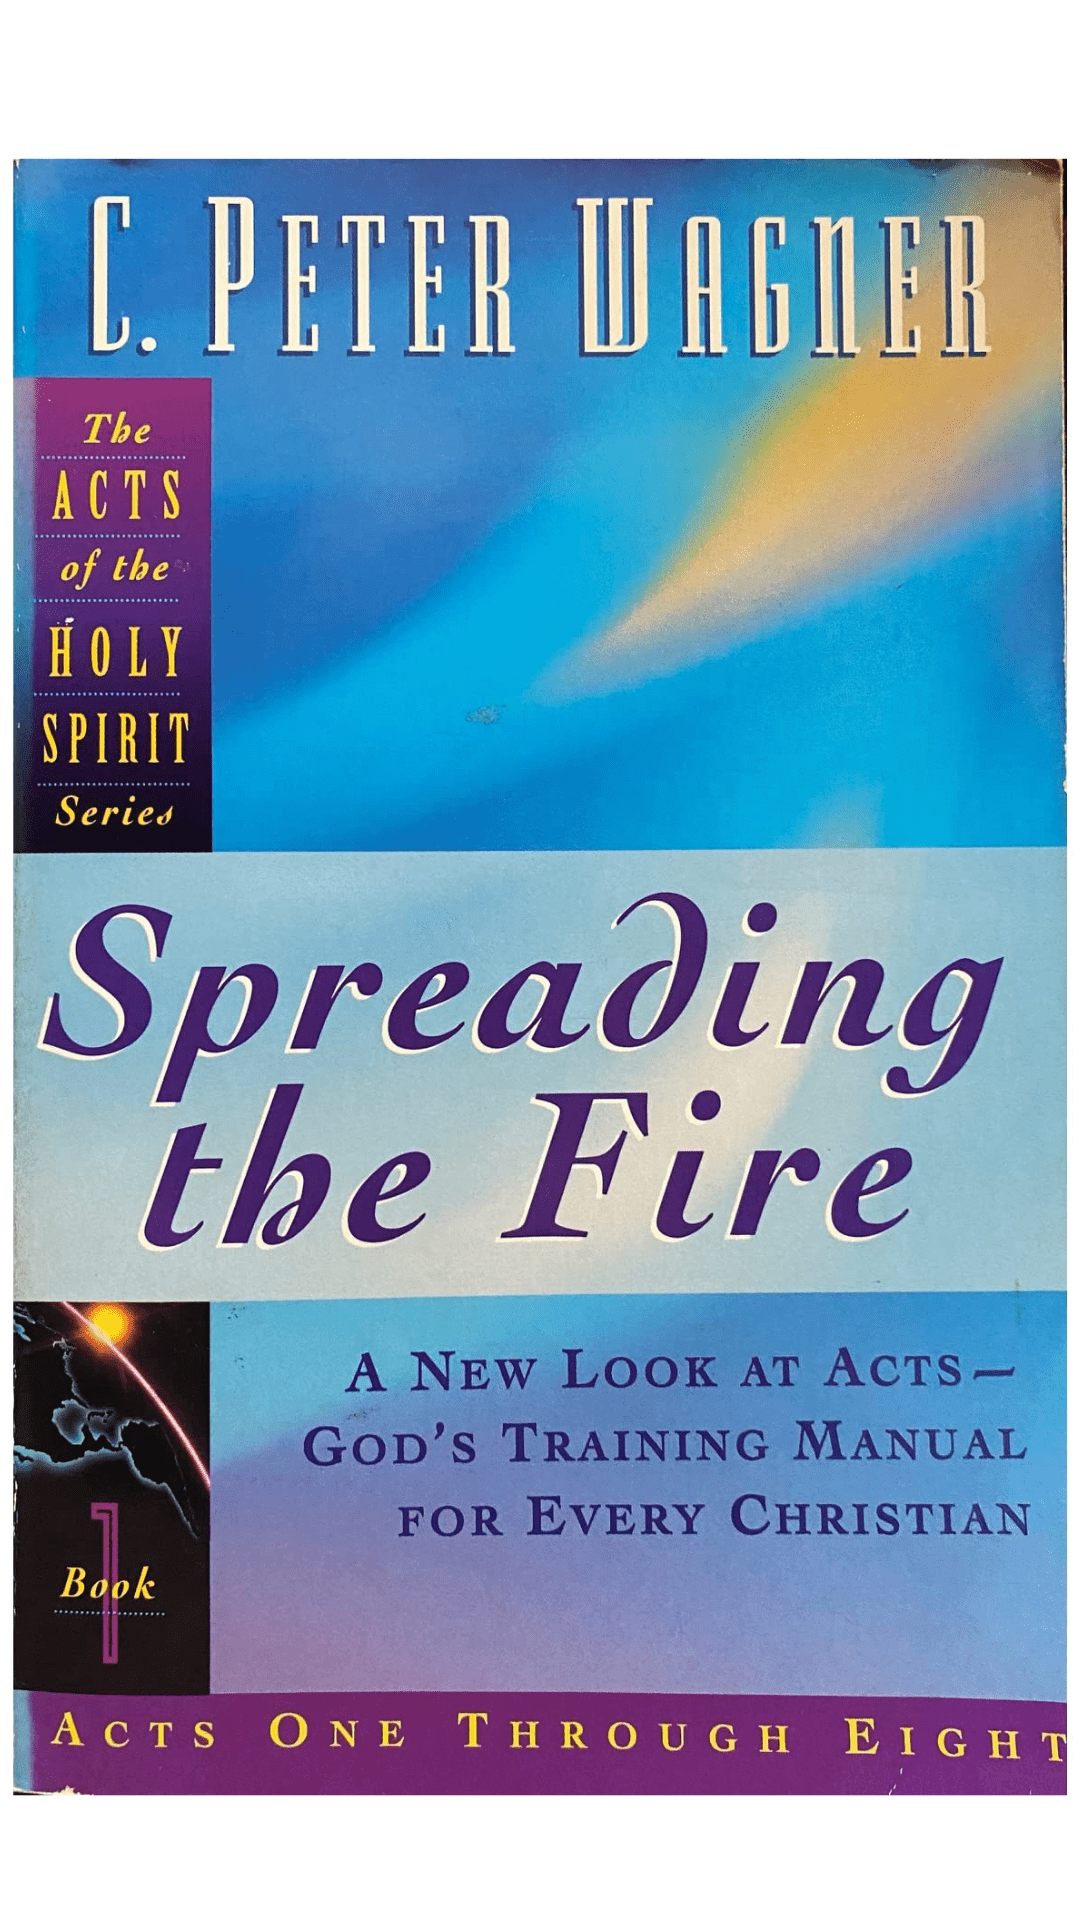 Spreading the Fire : New Look at Acts - God's Training Manual for Every Christian